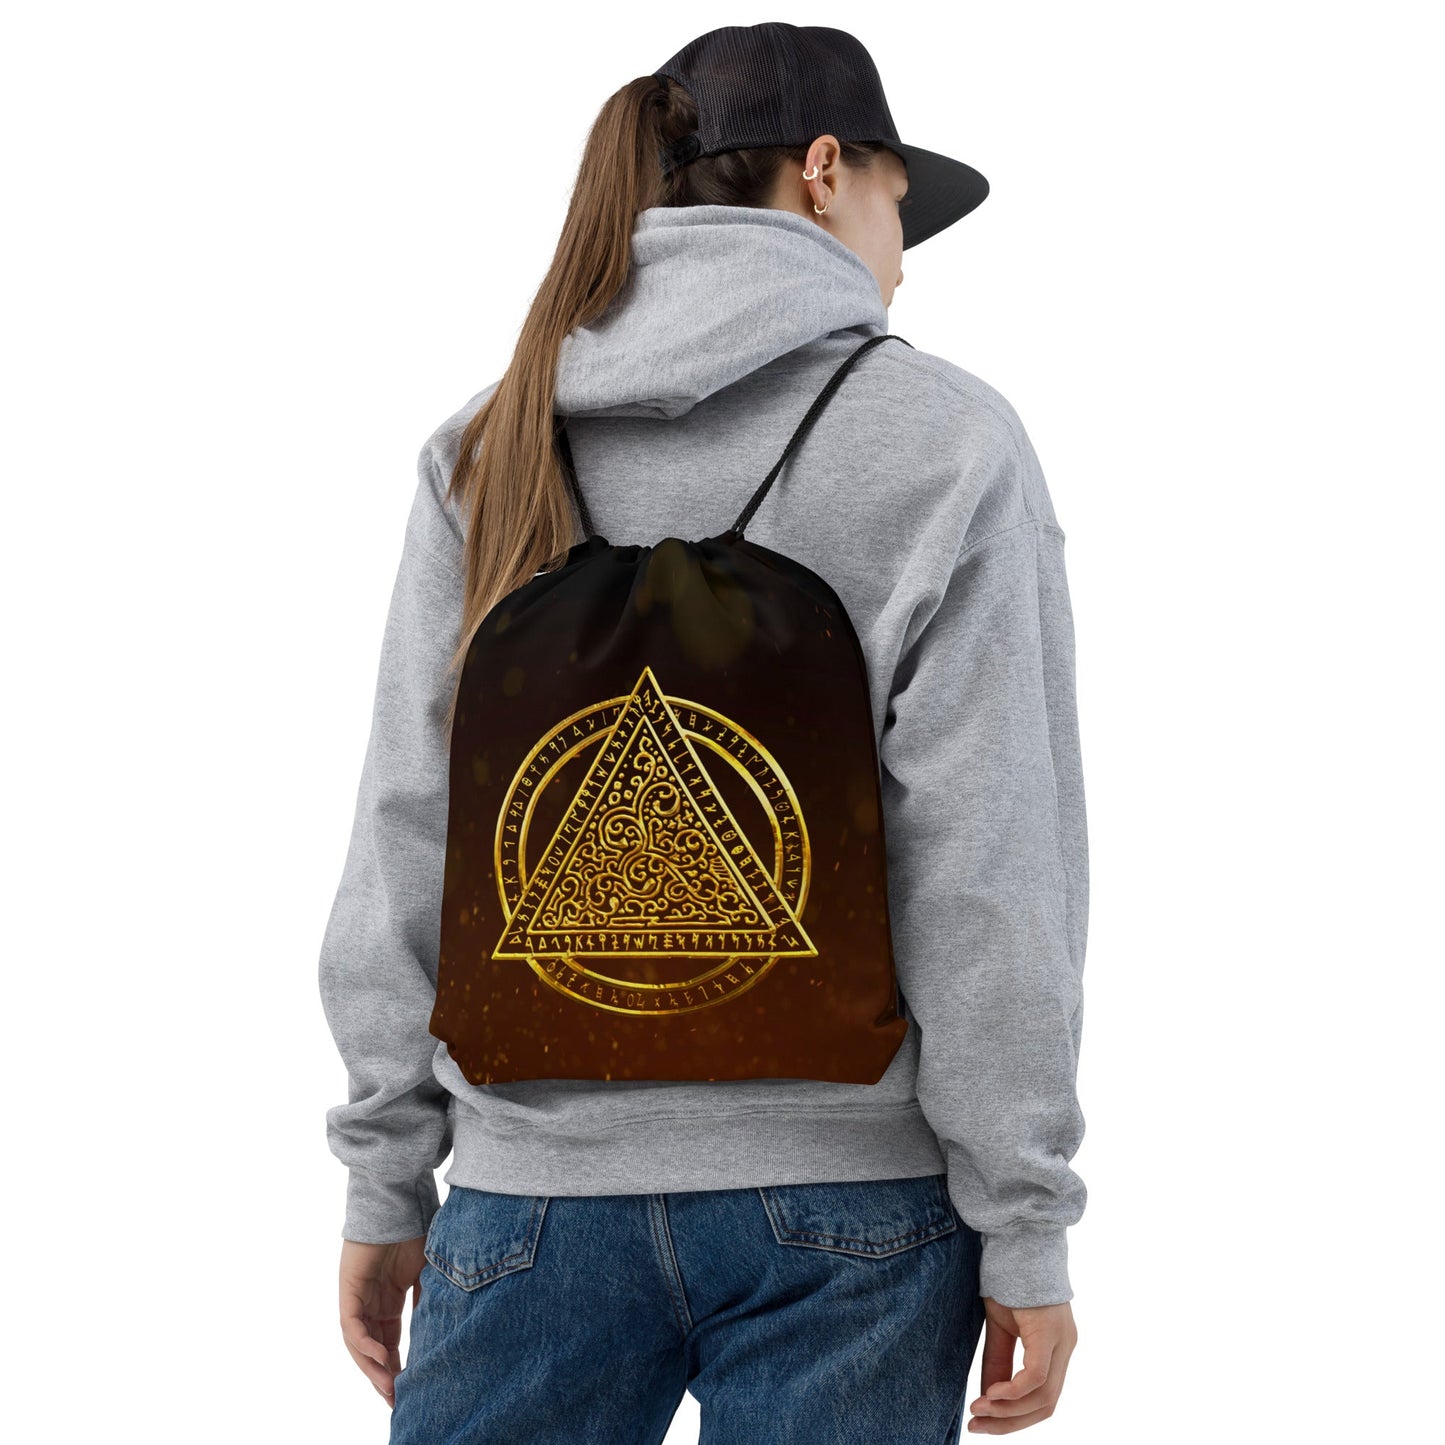 Drawstring Bag | The Last Rite | Logo - Spectral Ink Shop - Luggage & Bags -4408619_8894